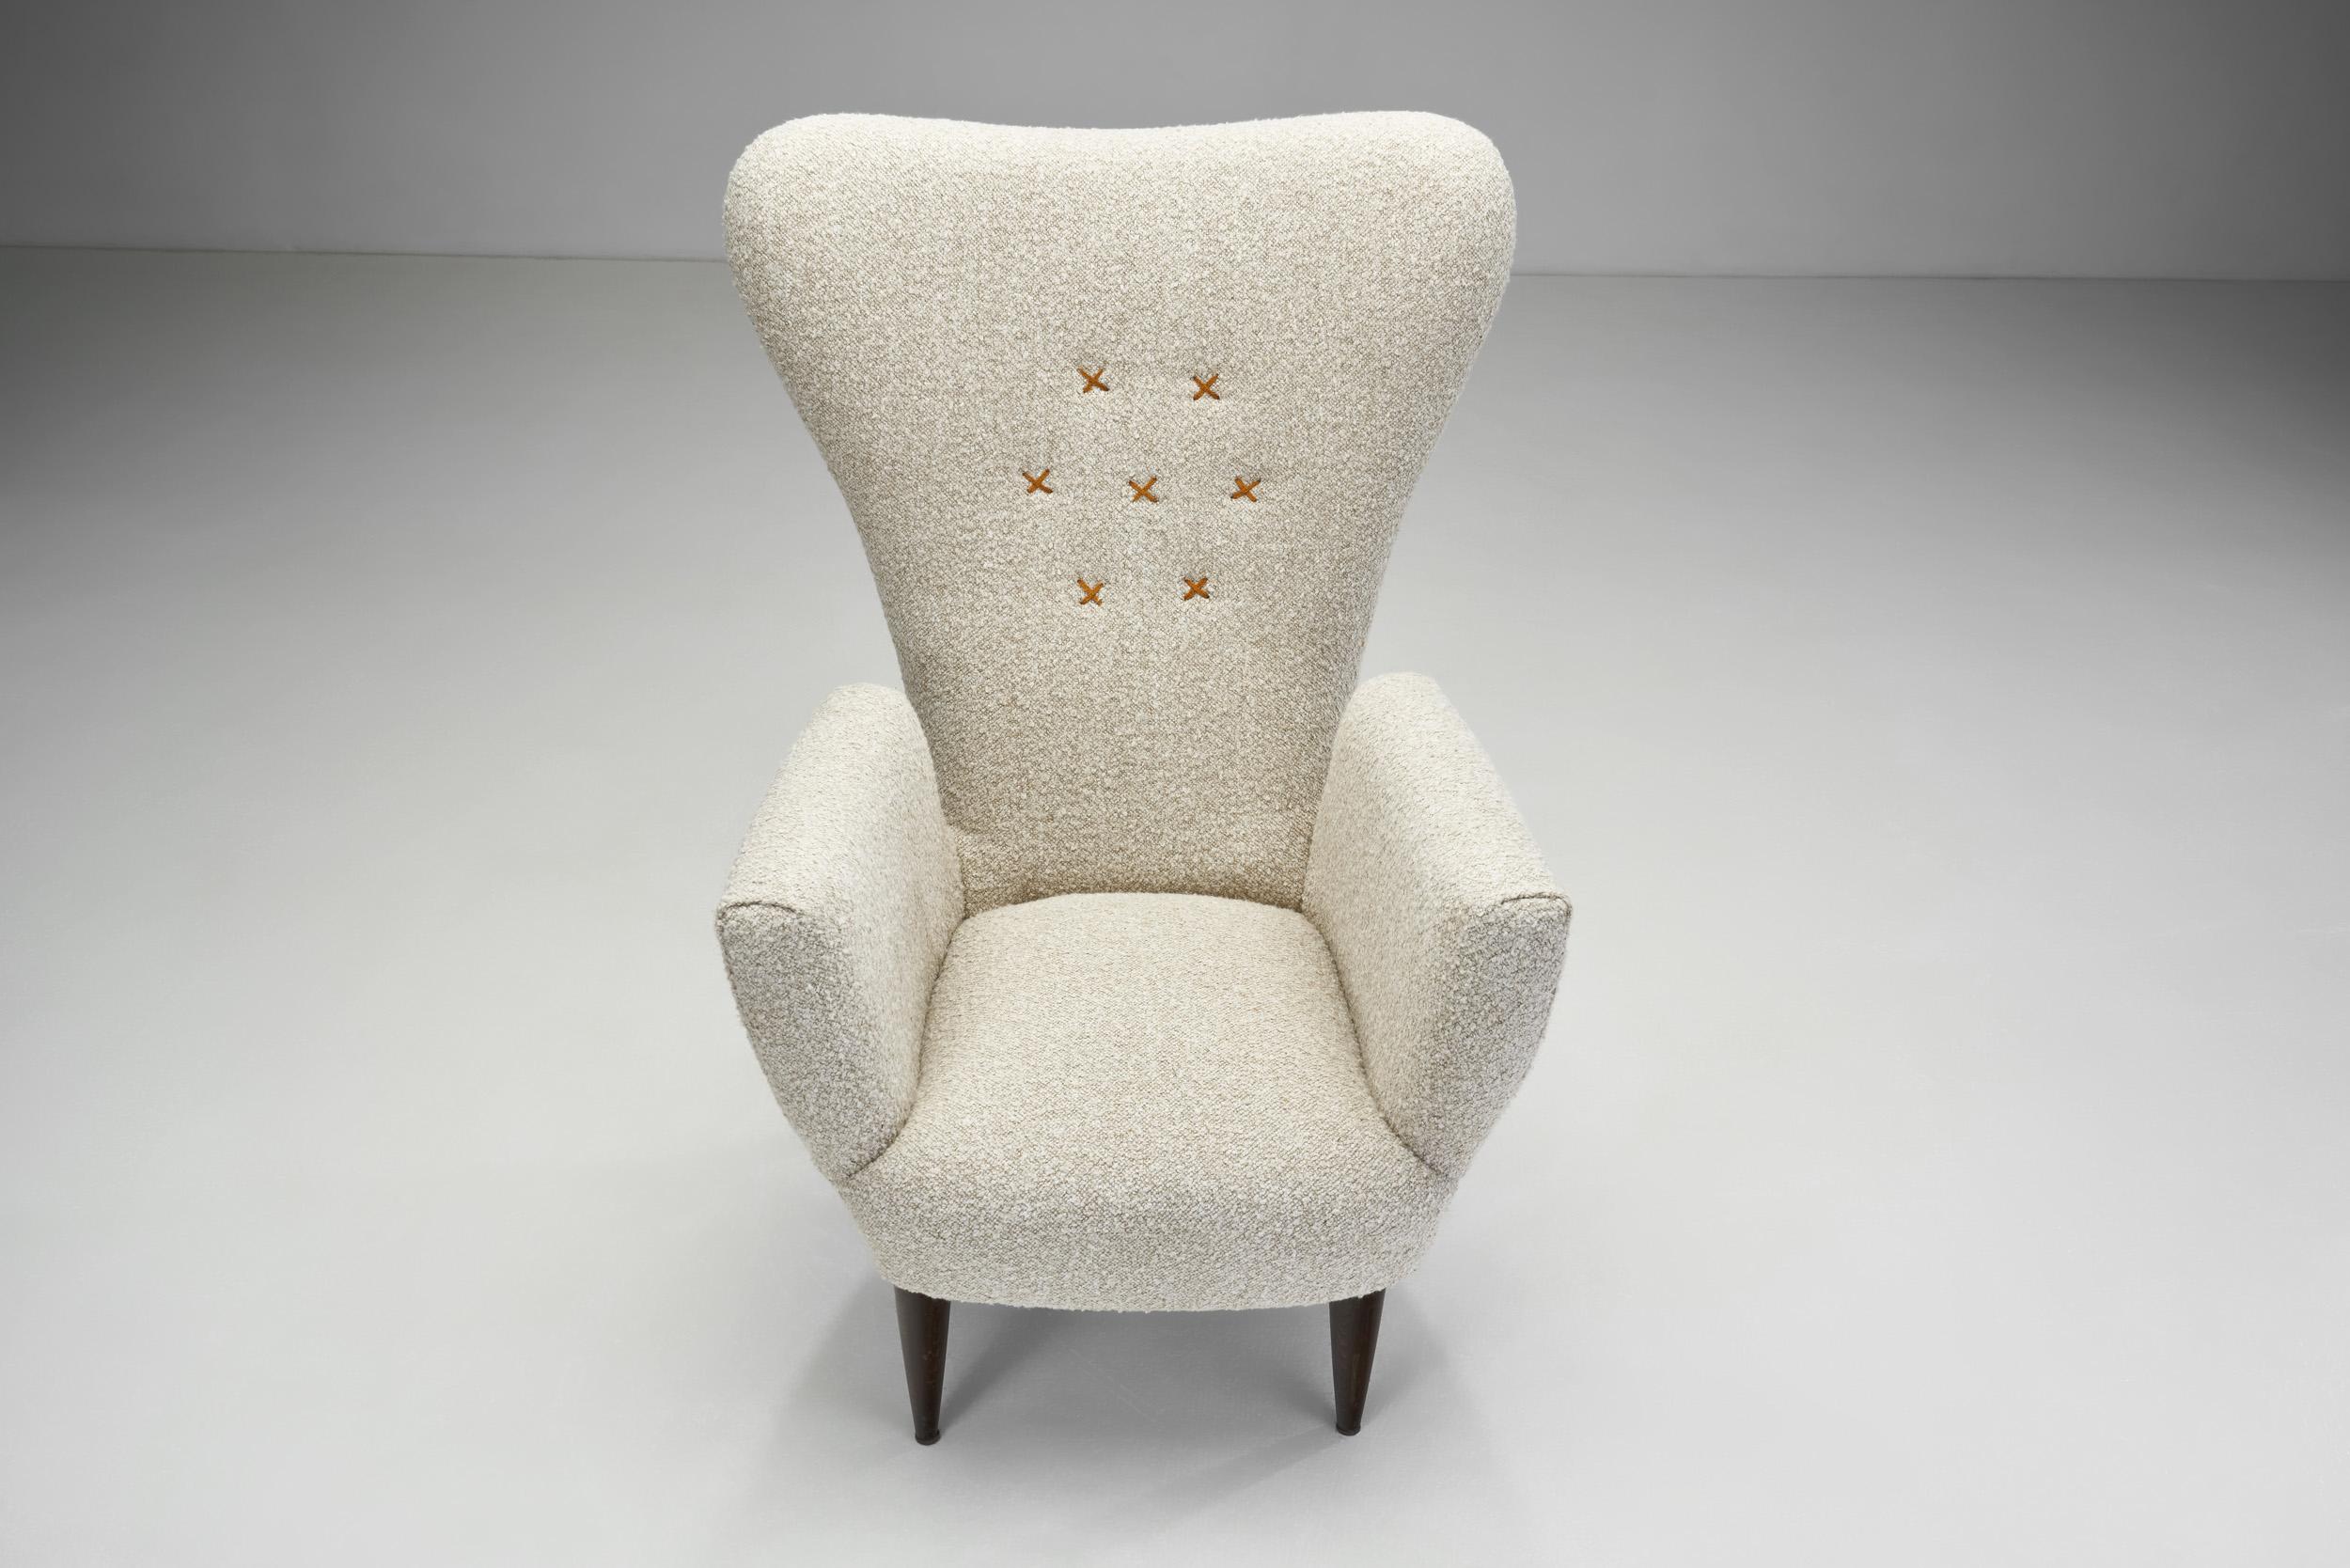 Bouclé Italian Modern Upholstered High-Back Armchairs with Cross Stitches, Italy 1960s For Sale